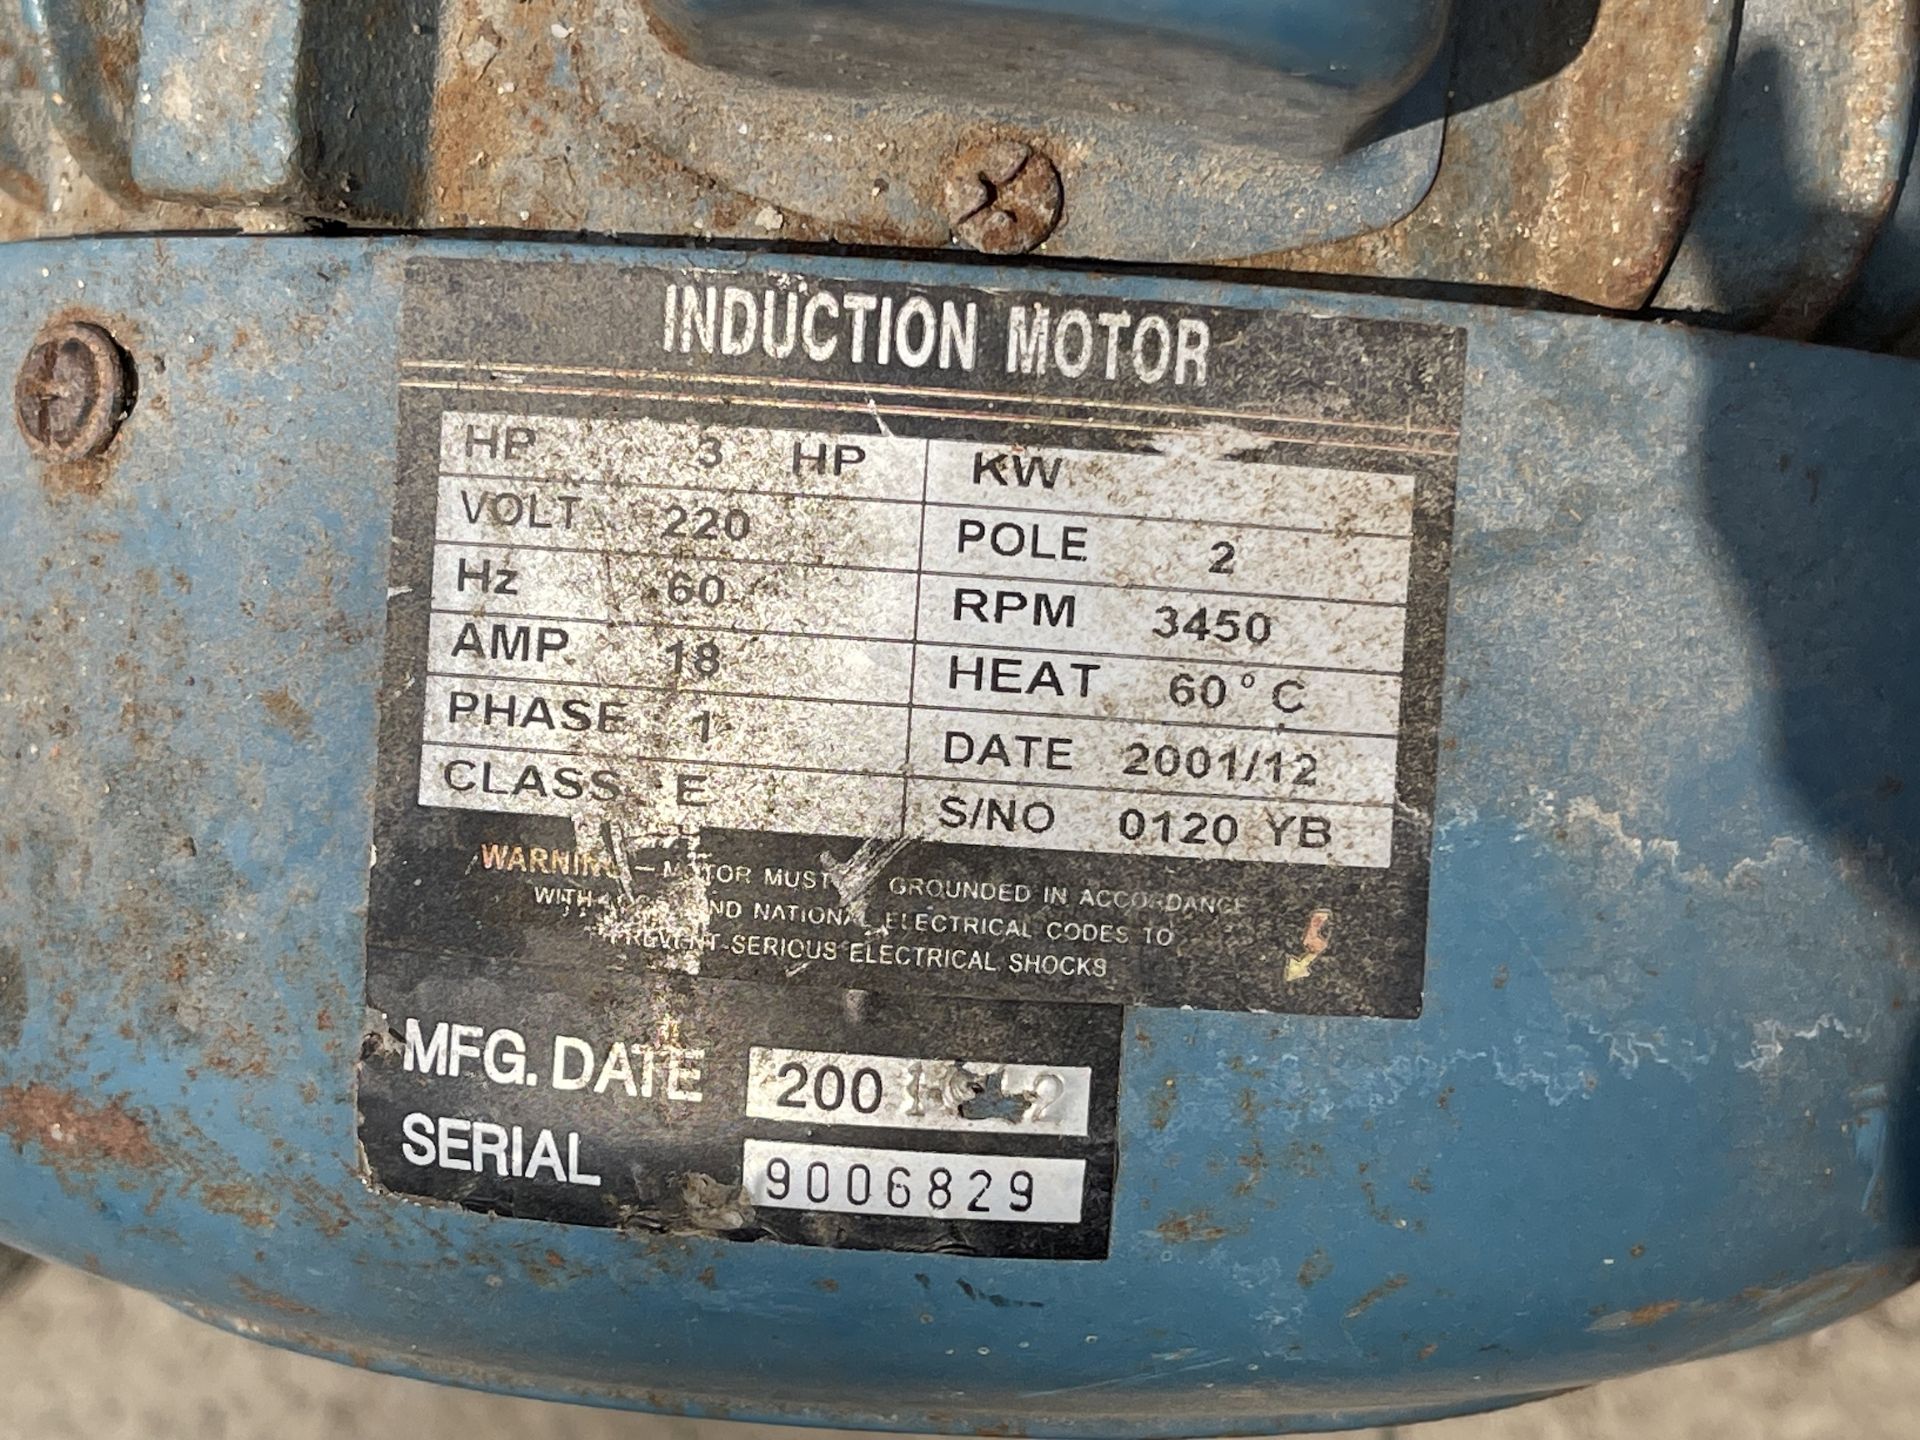 Induction Motor (EH162) - Lester, Pa - Image 5 of 6